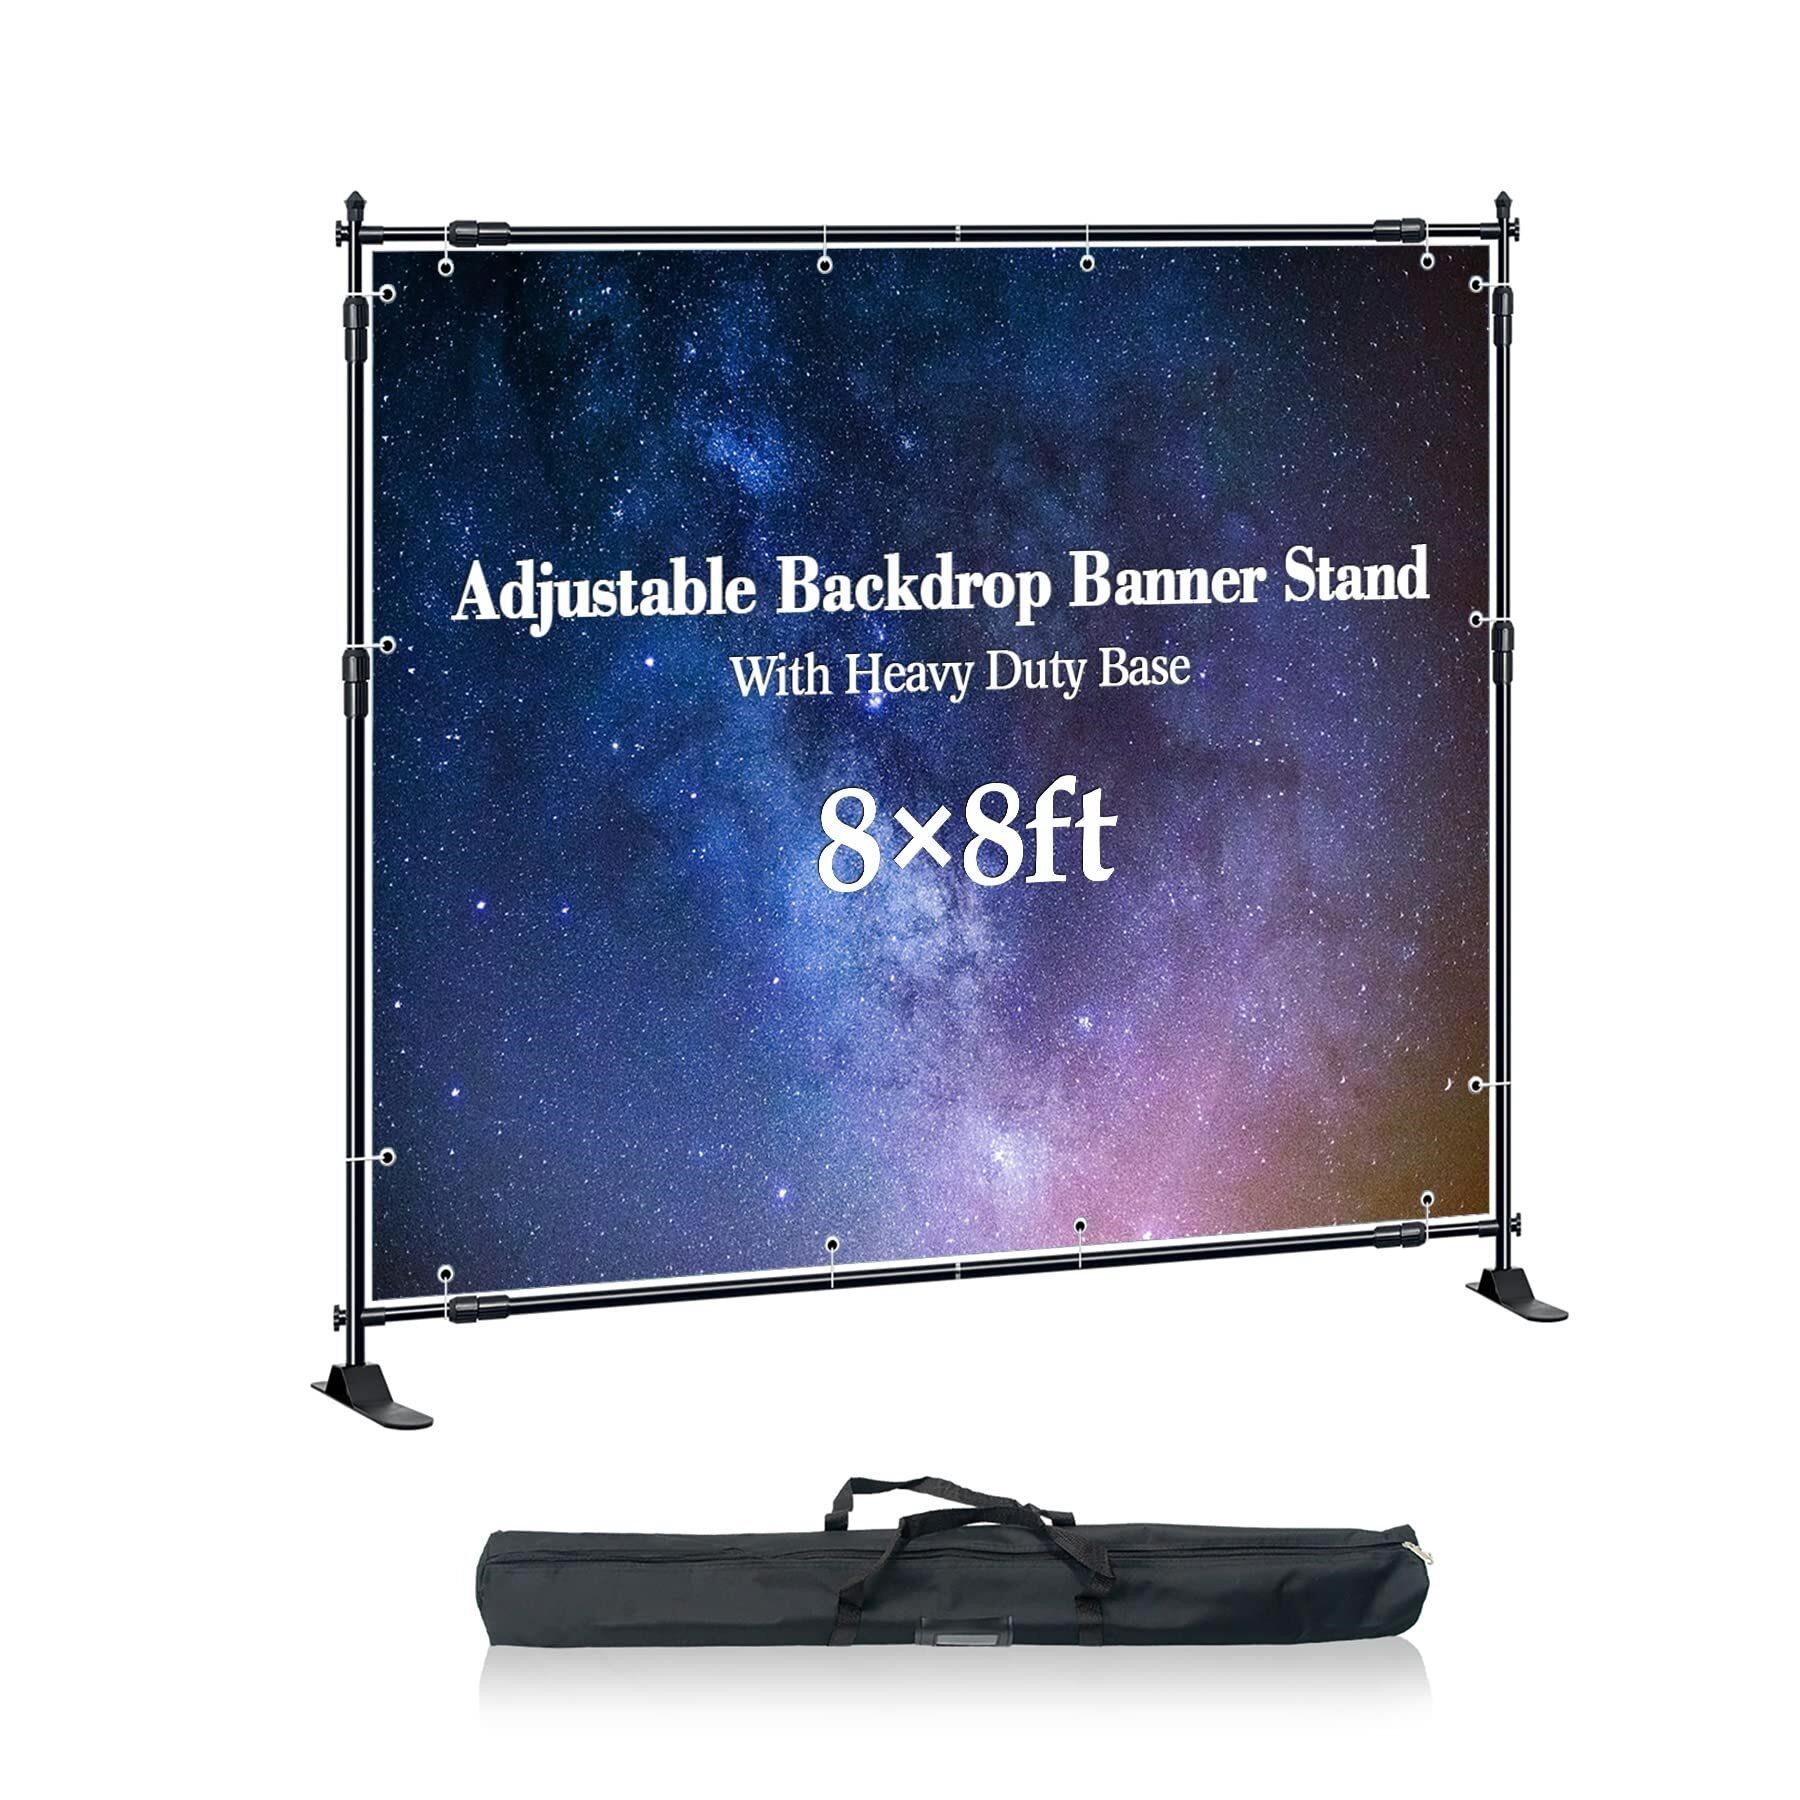 Backdrop Banner Stand, Adjustable Heavy Duty